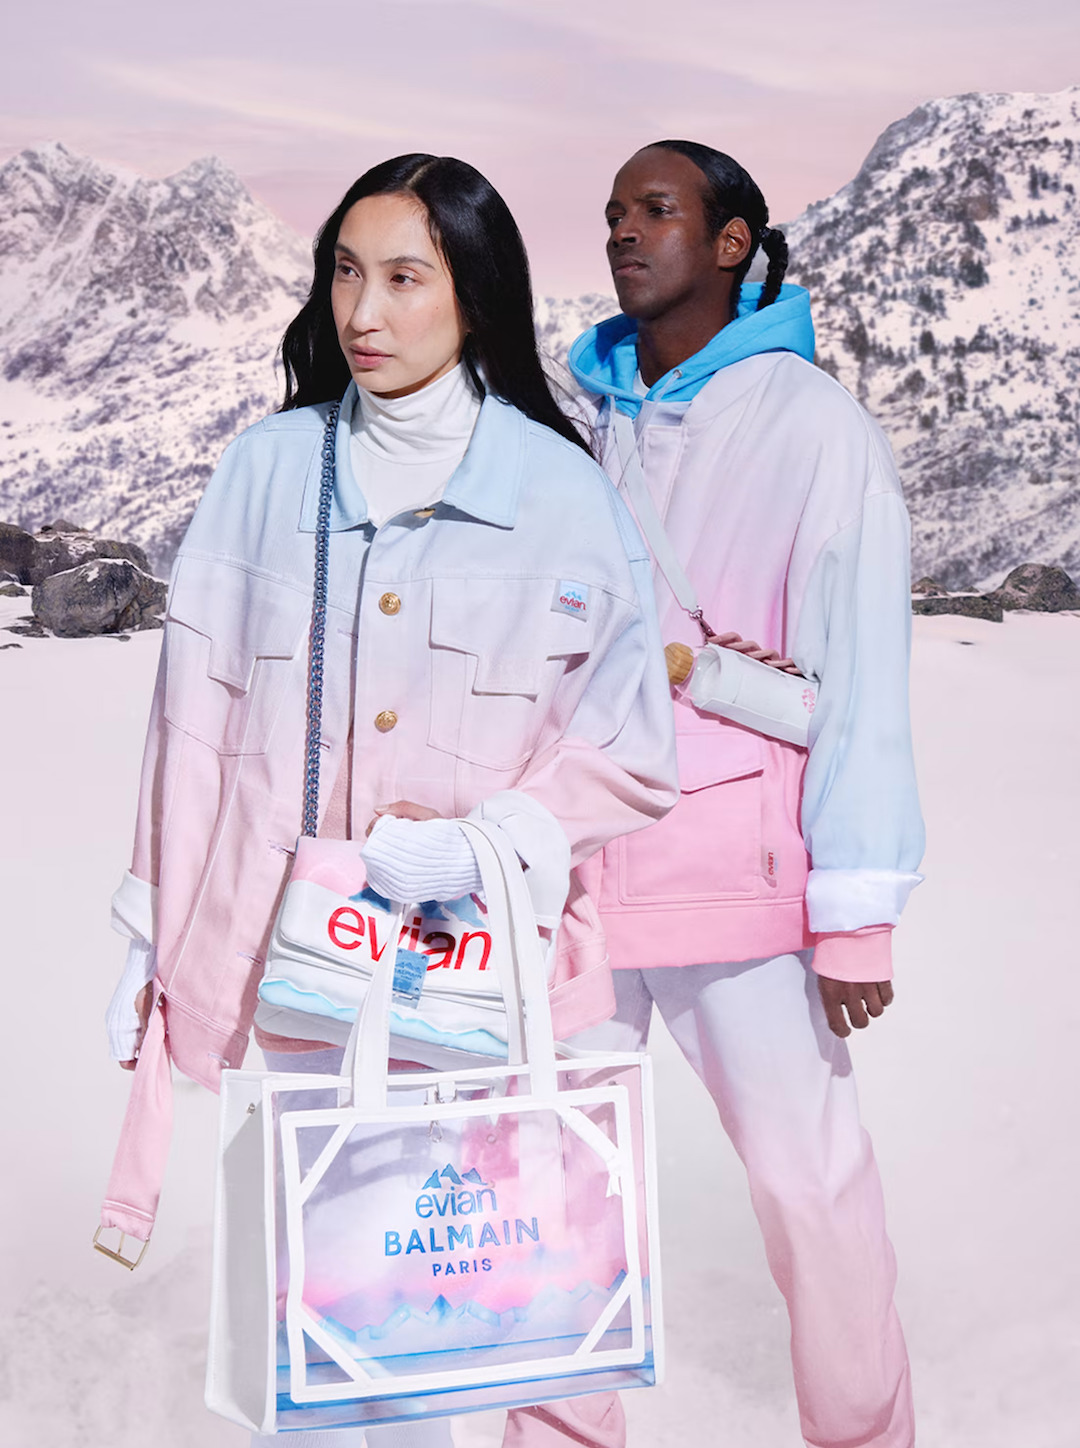 Balmain Teams Up With Evian On Ready-To-Wear Collection To Spotlight ...